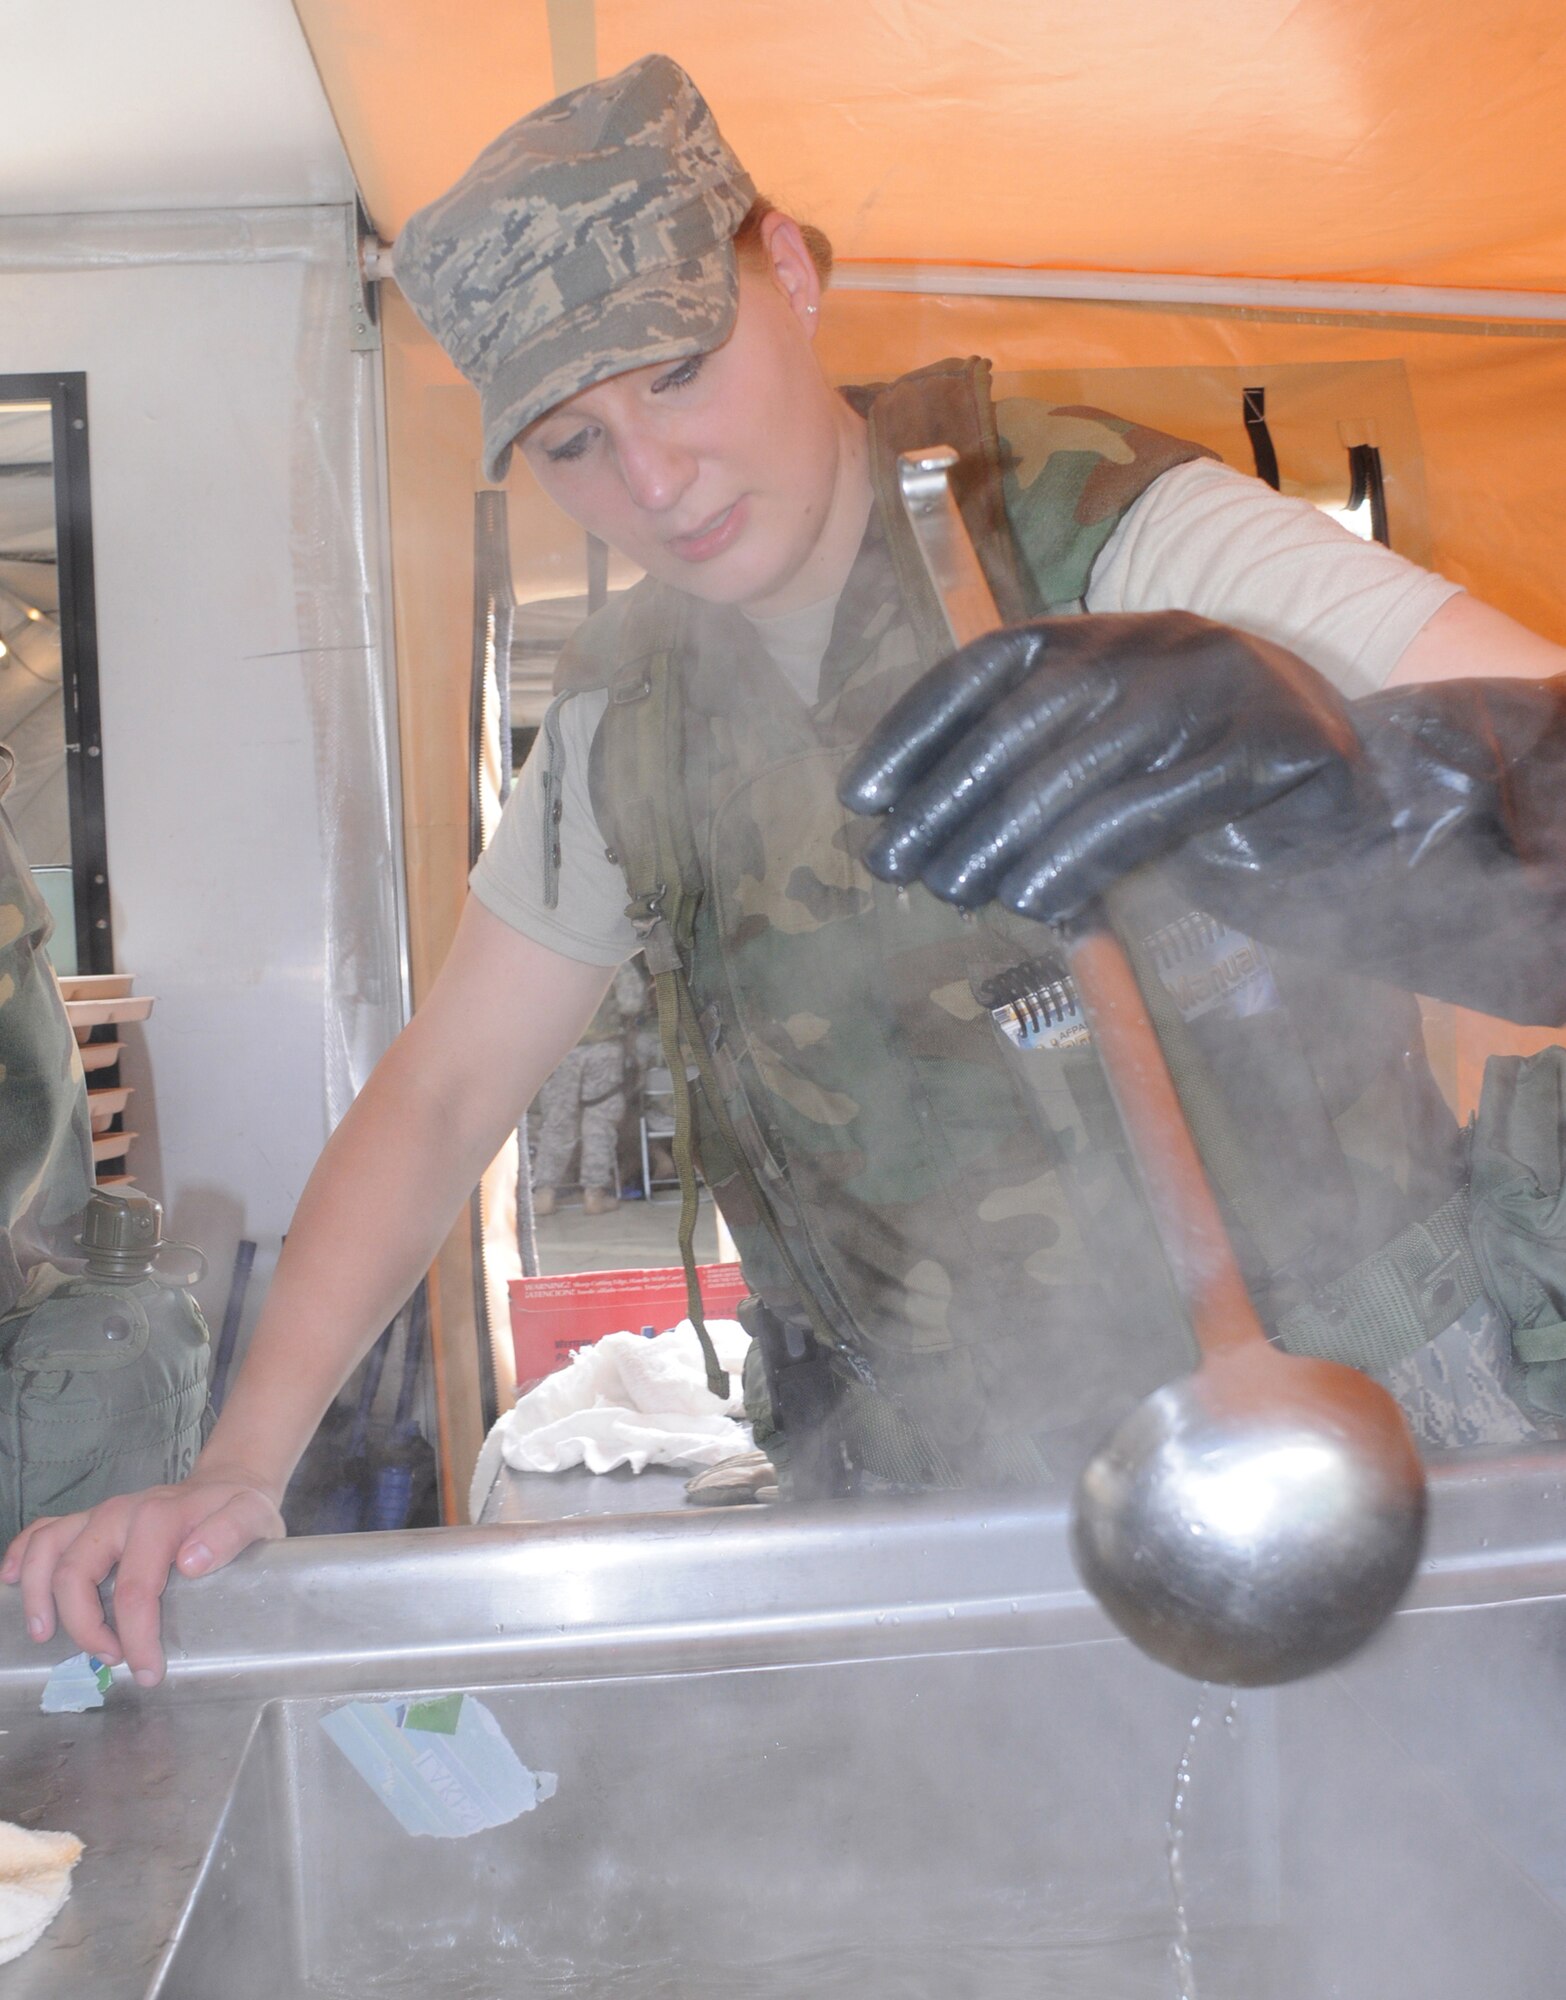 Airman First Class Yelizaveta Semmom, 86th Services Squadron, Ramstein Air Base, Germany, cleans the cooking utensils after serving a hot lunch while participating in a week long contingency exercise Silver Flag.  Members throughout United States Air Forces in Europe participated in the mandated seven day training for civil engineers, services, logistics, medical and personnelists. (U.S. Air Force photo by: Tech. Sgt. Sean Mateo White)